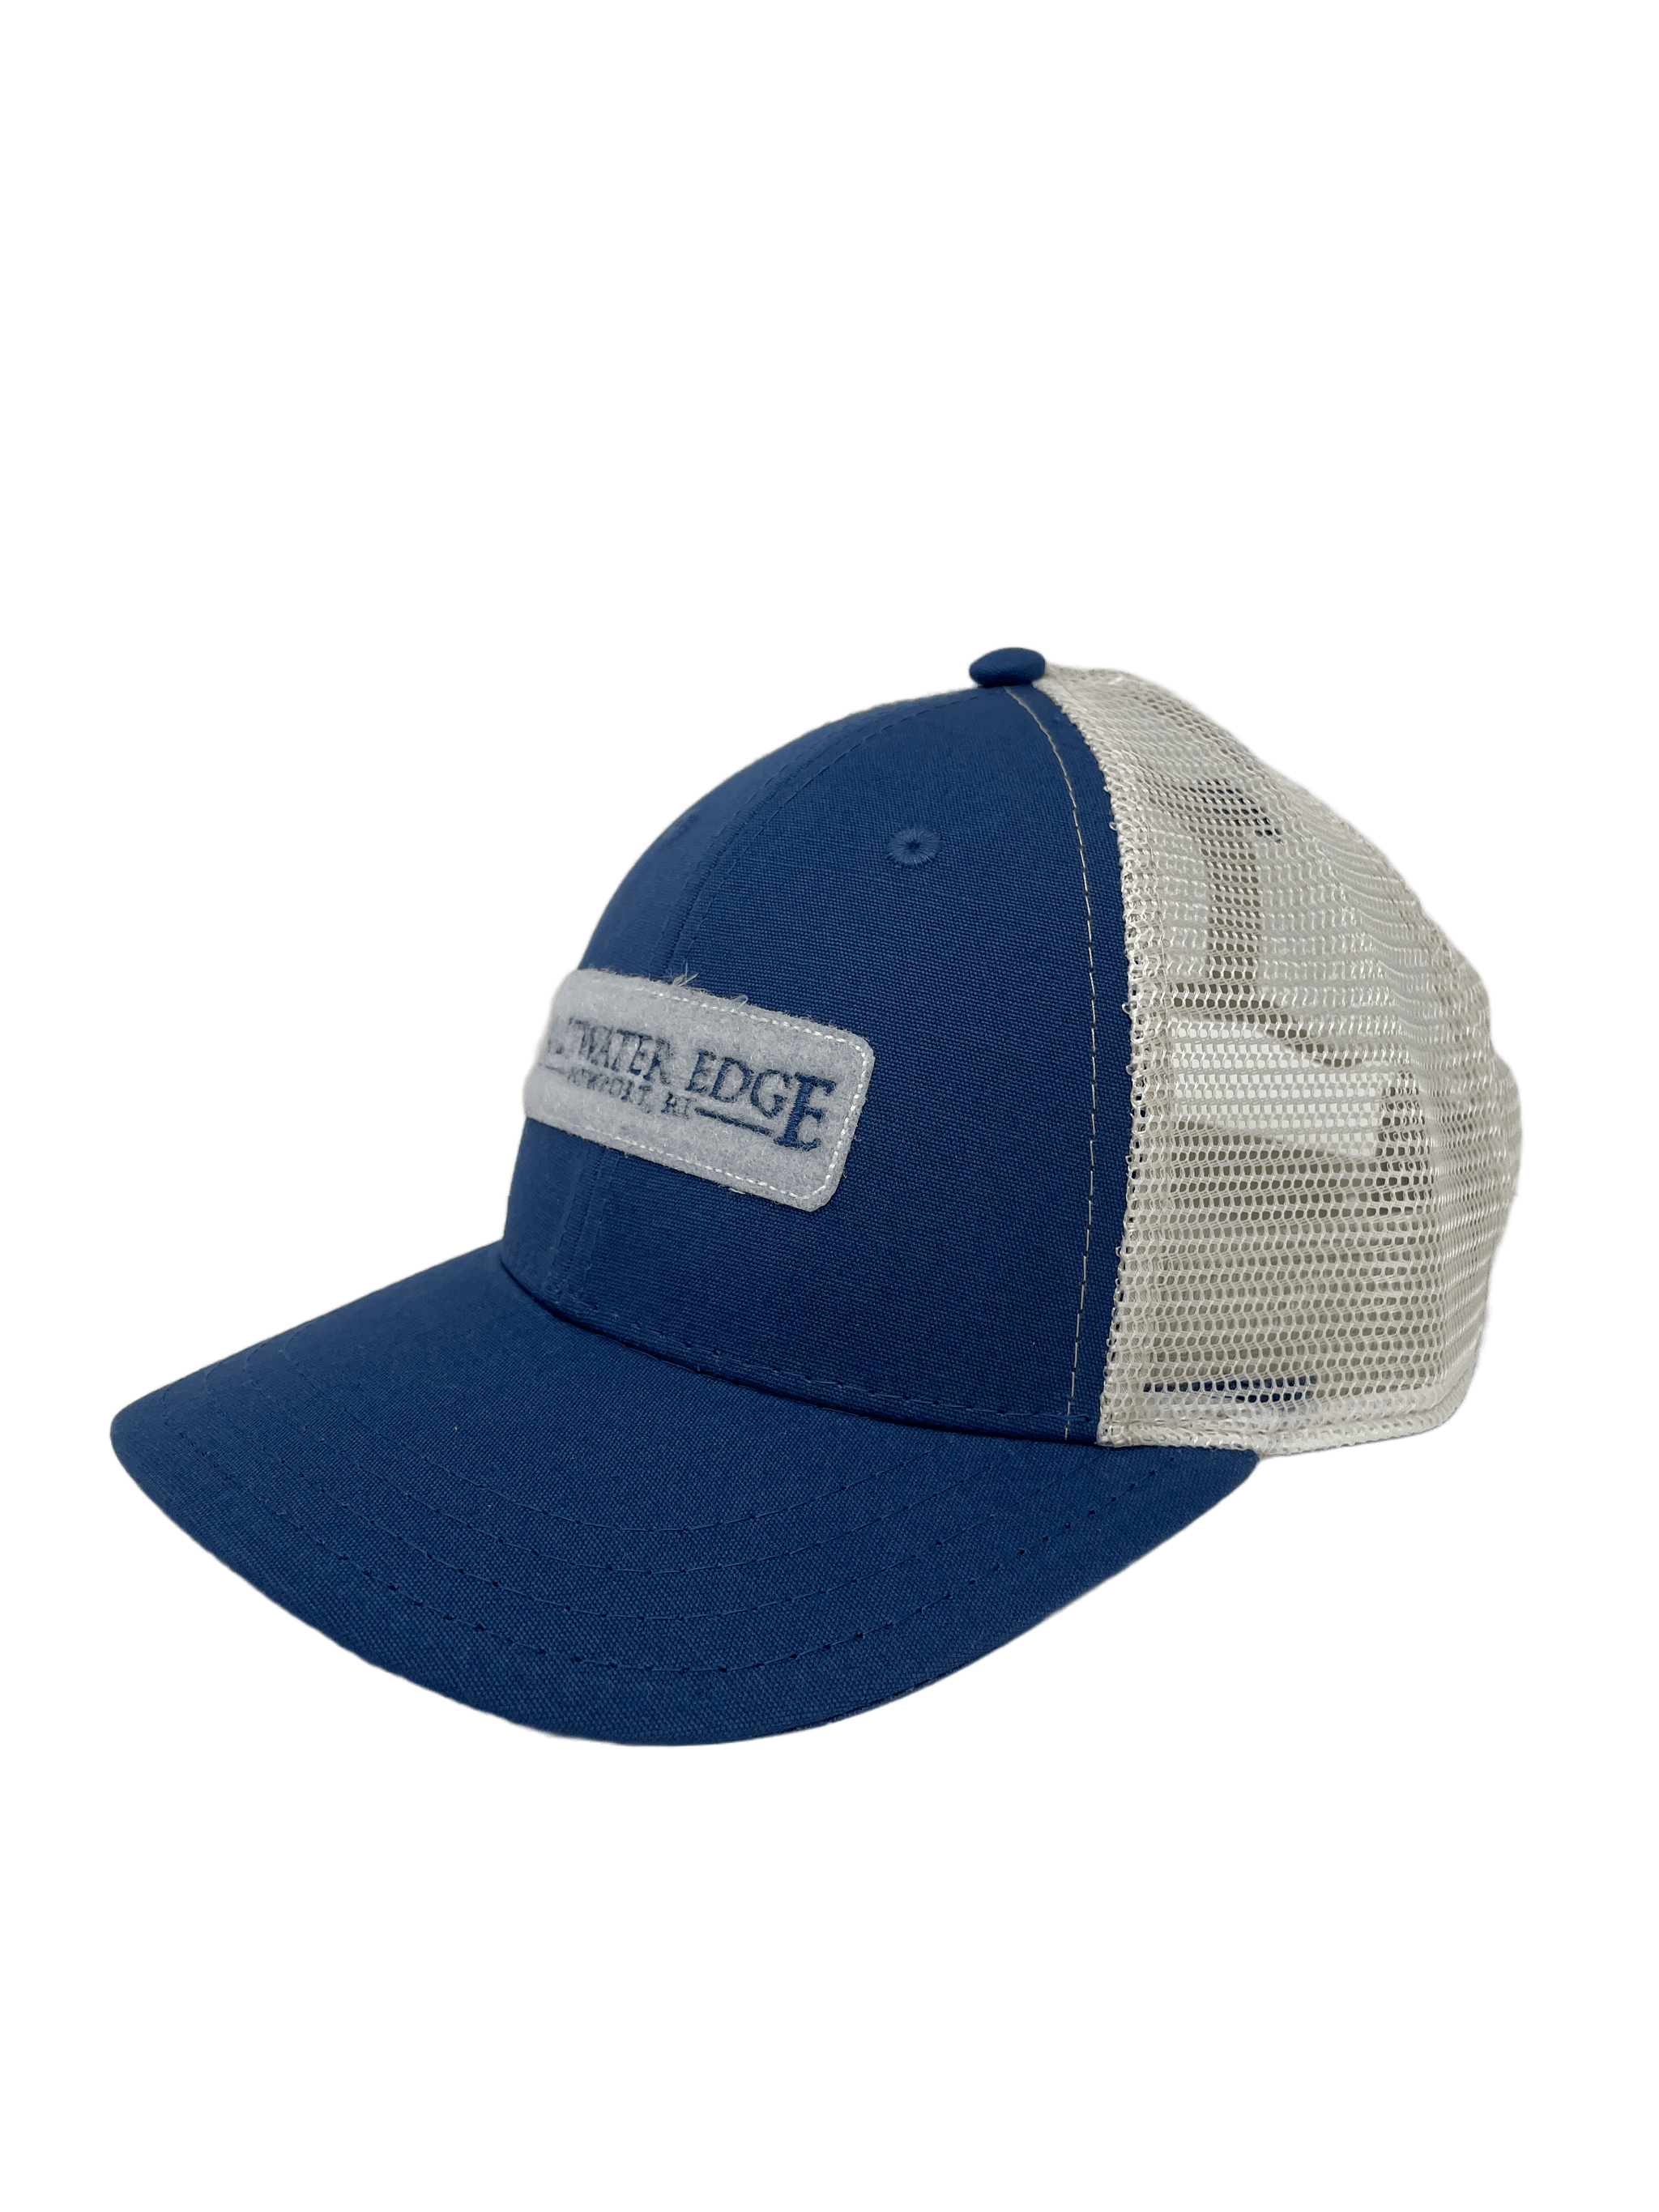 The Saltwater Edge Thames Street Patch Hat